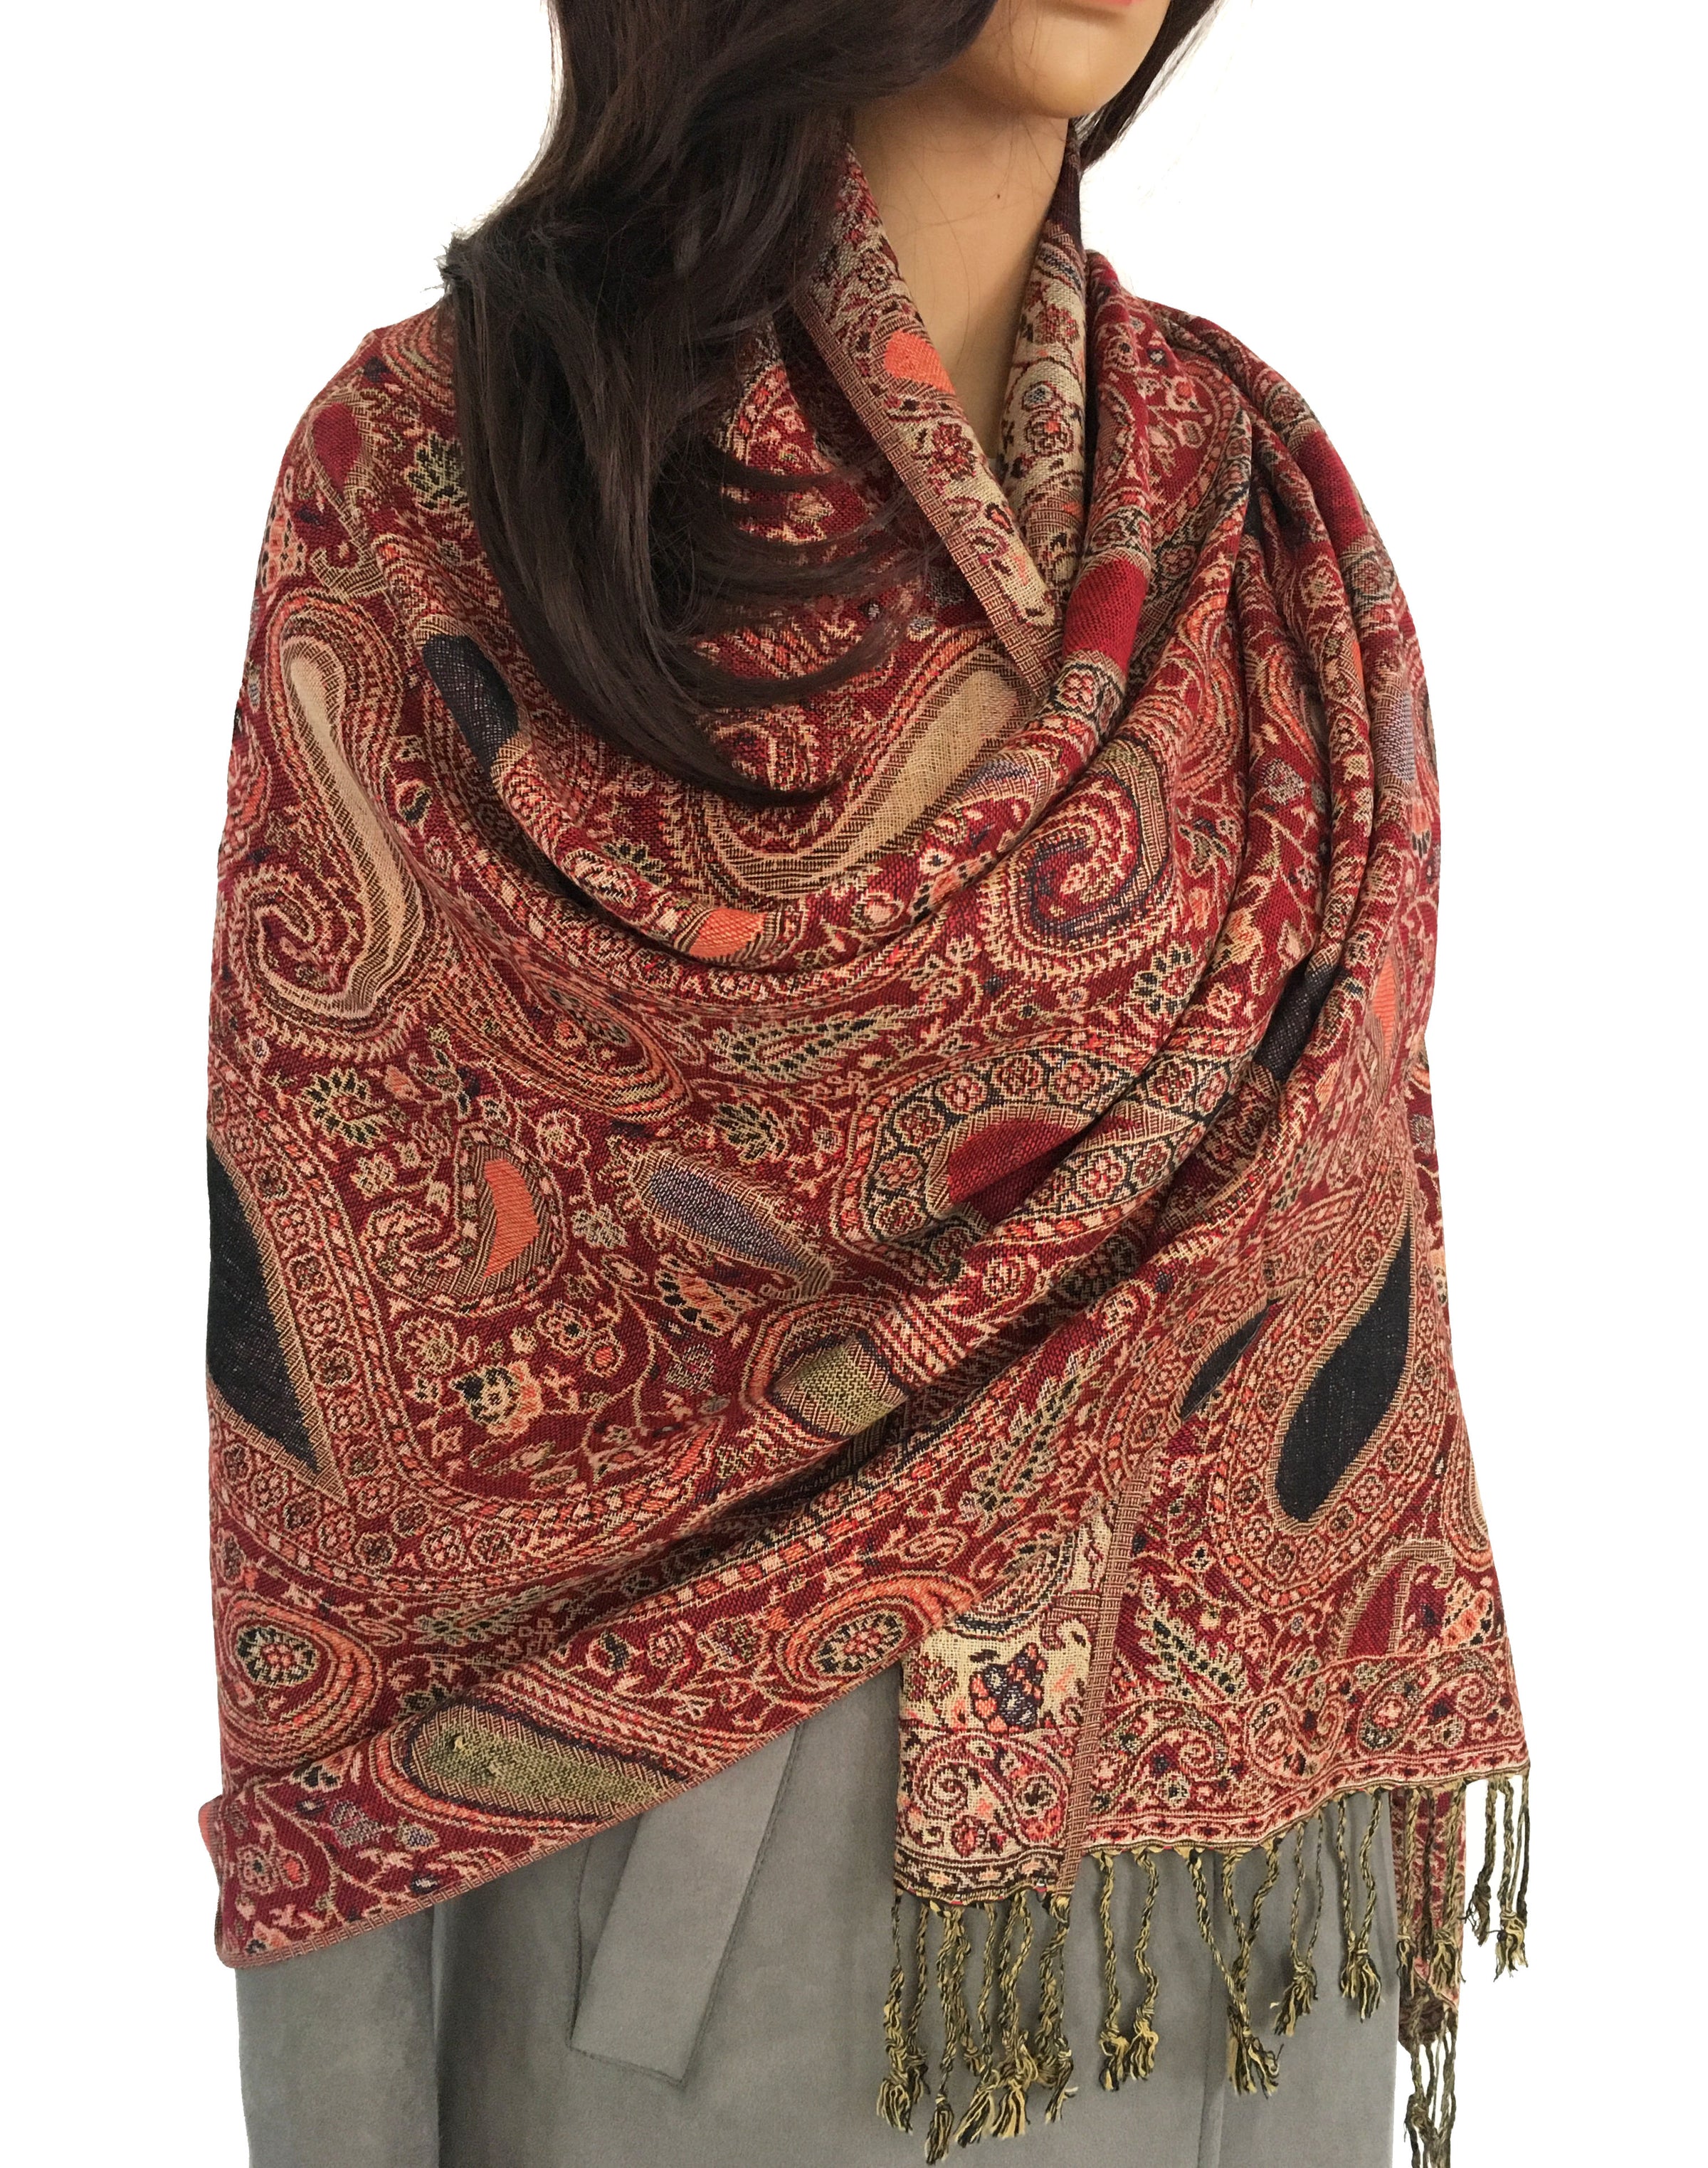 Sure Design Nepal Traditional Paisley Pashmina Shawl Scarf in Red